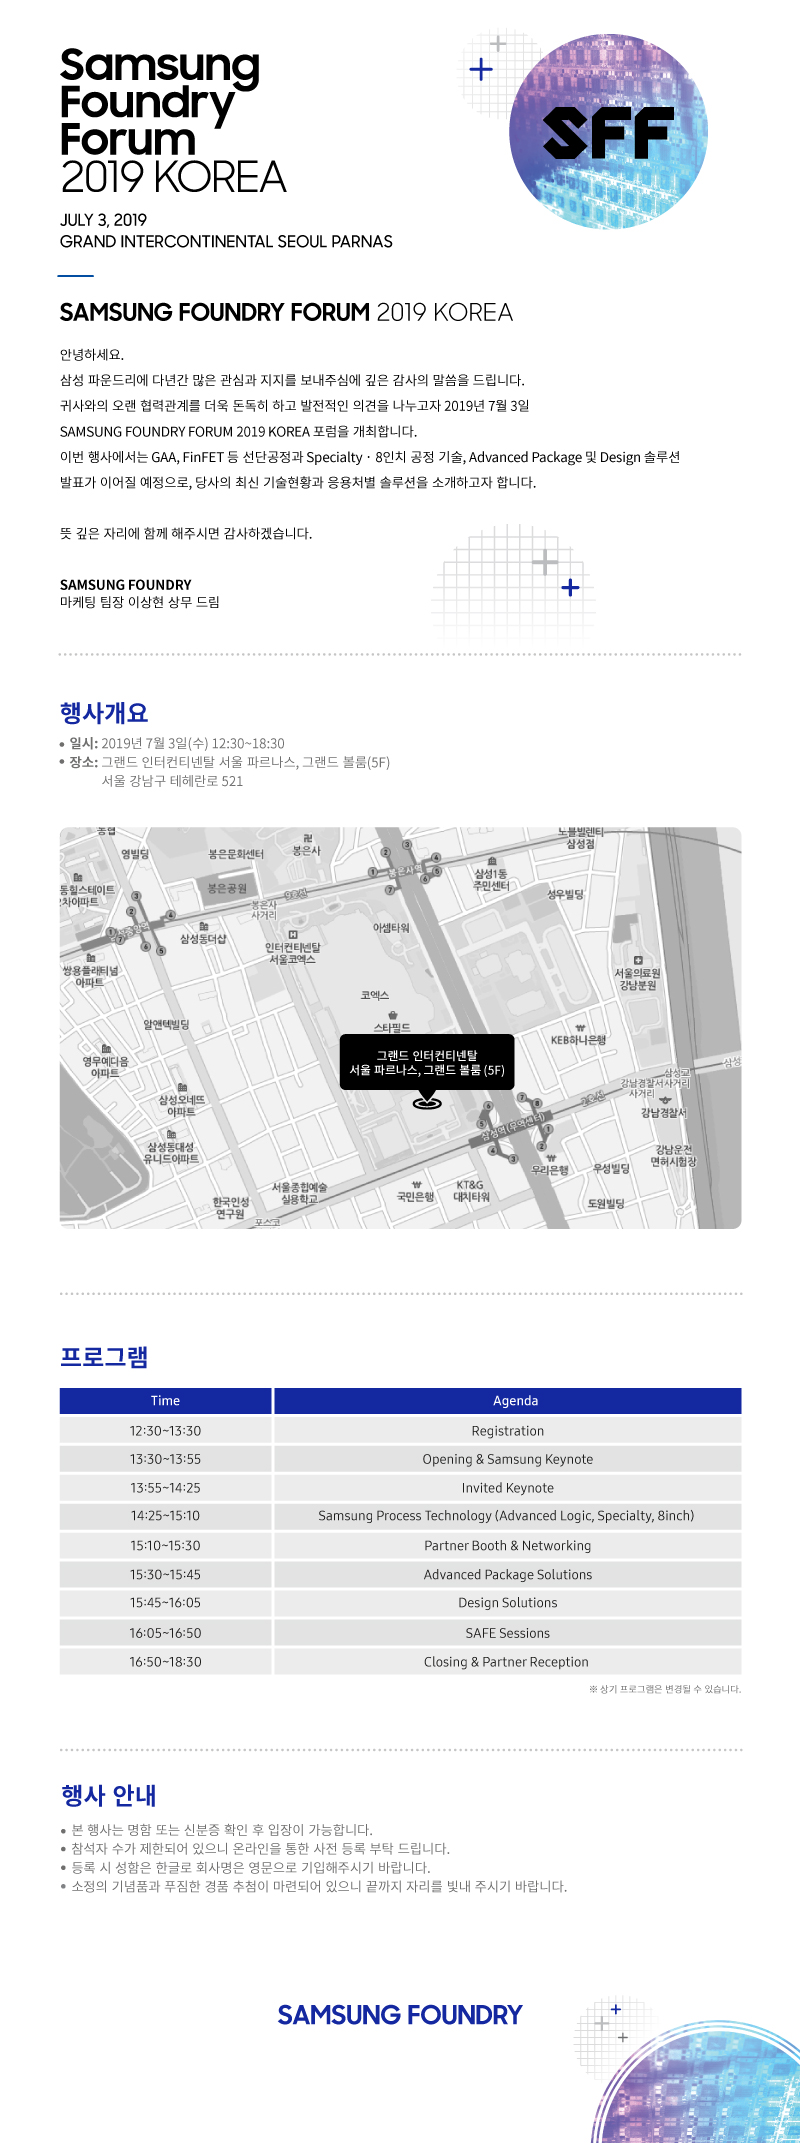 An image with information such as the event date and time and location of the Samsung Foundry Forum 2019 Korea.